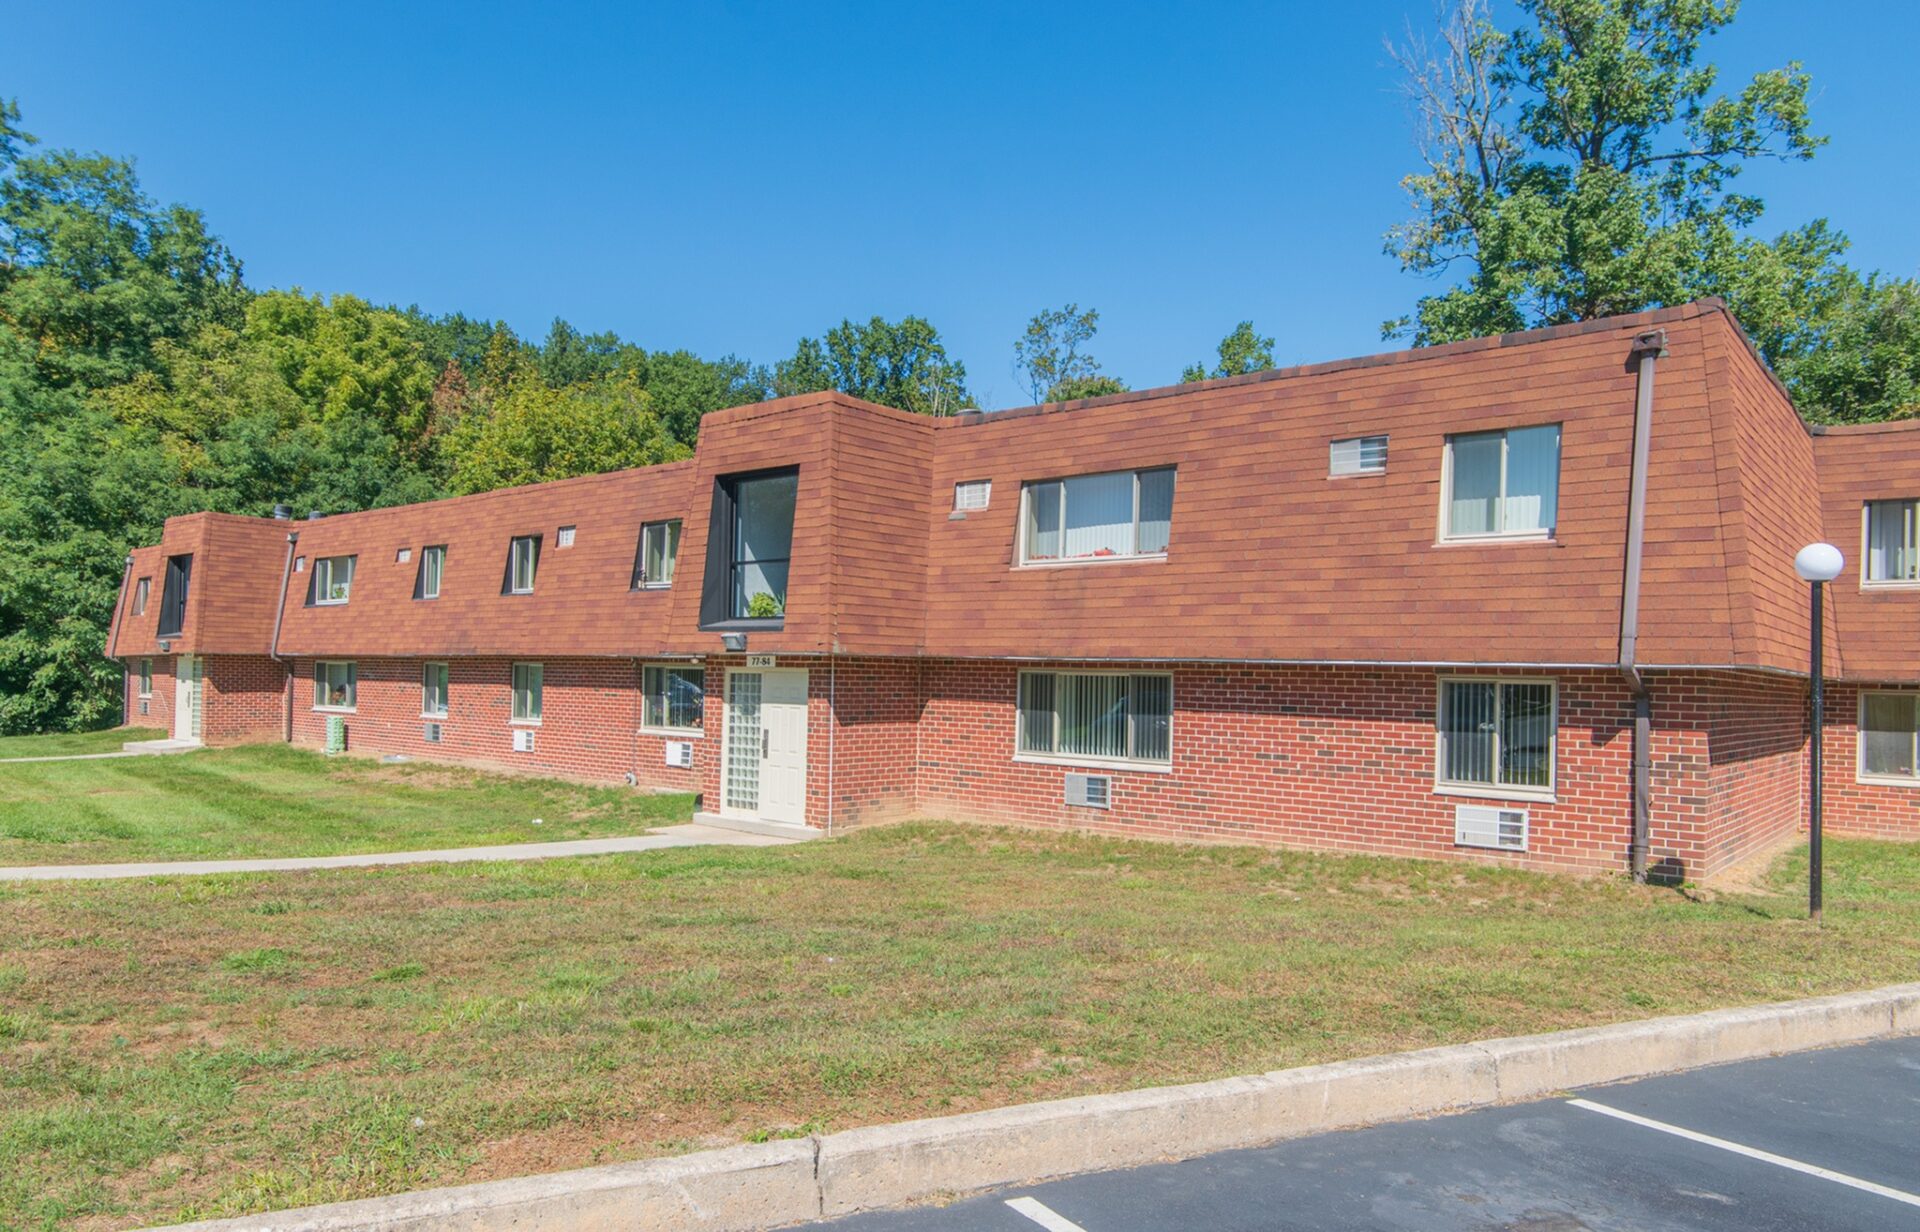 Exterior of Hollow Run Apartments with parking spaces.